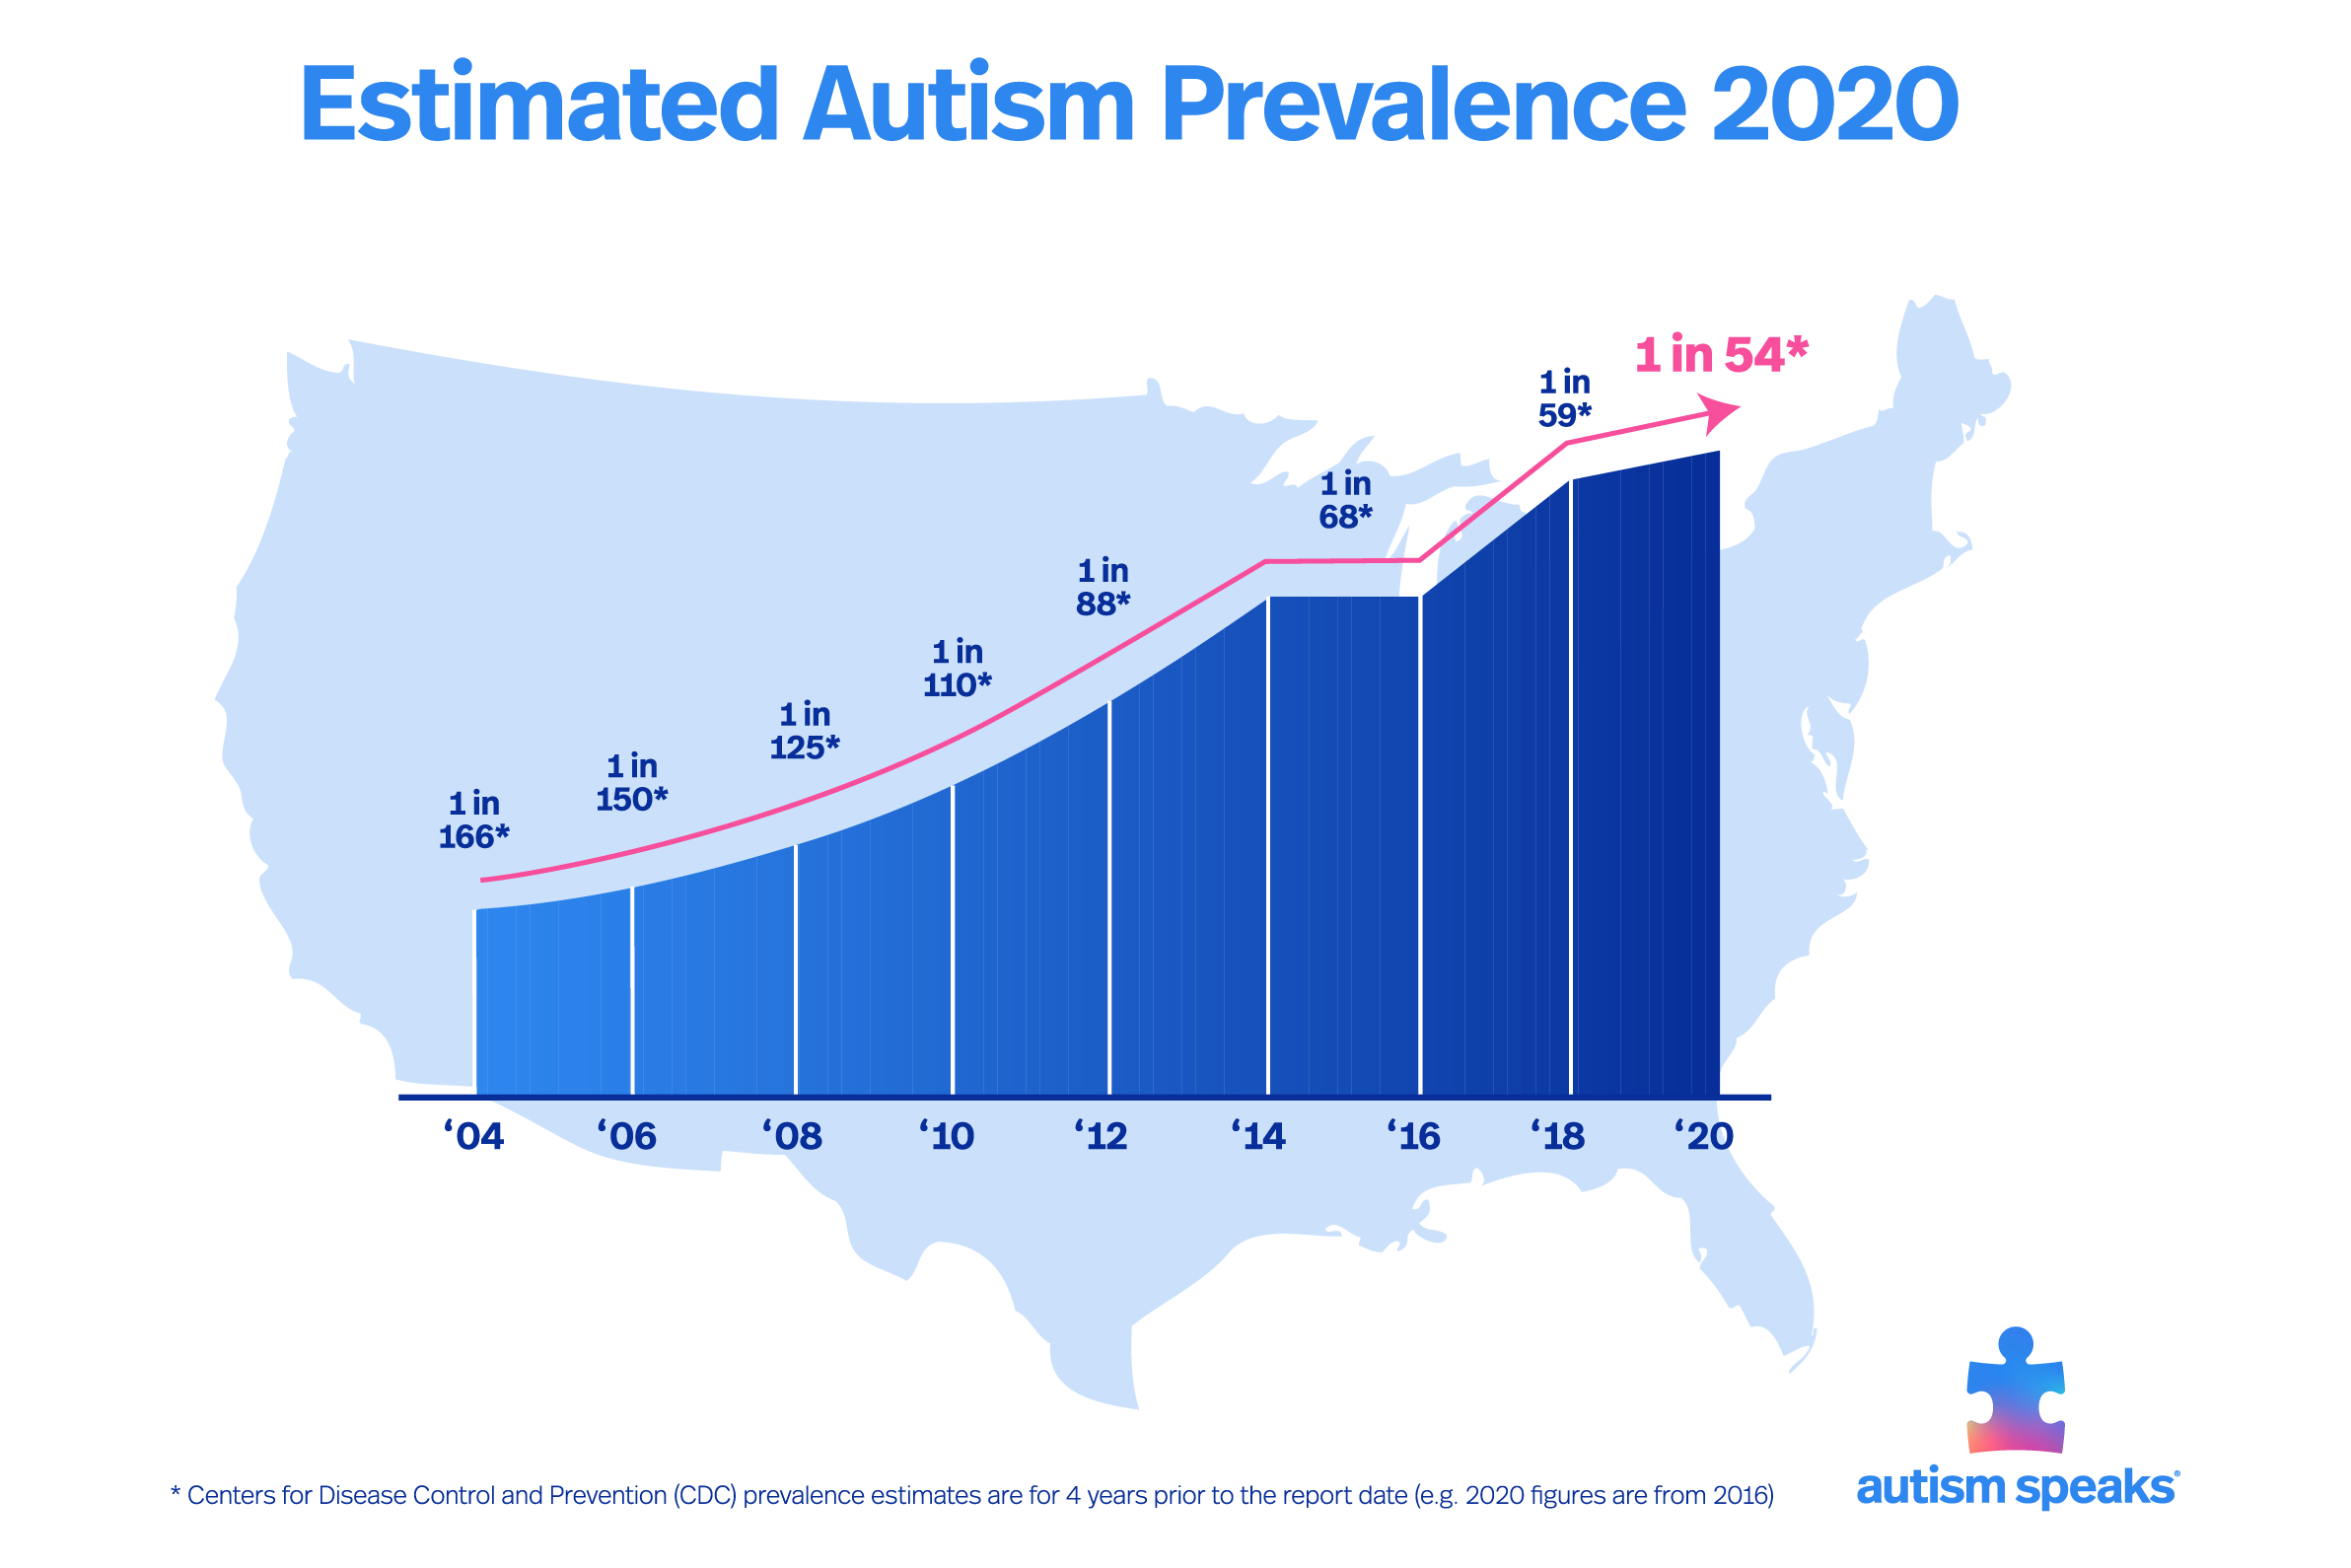 Is the world becoming more autistic?